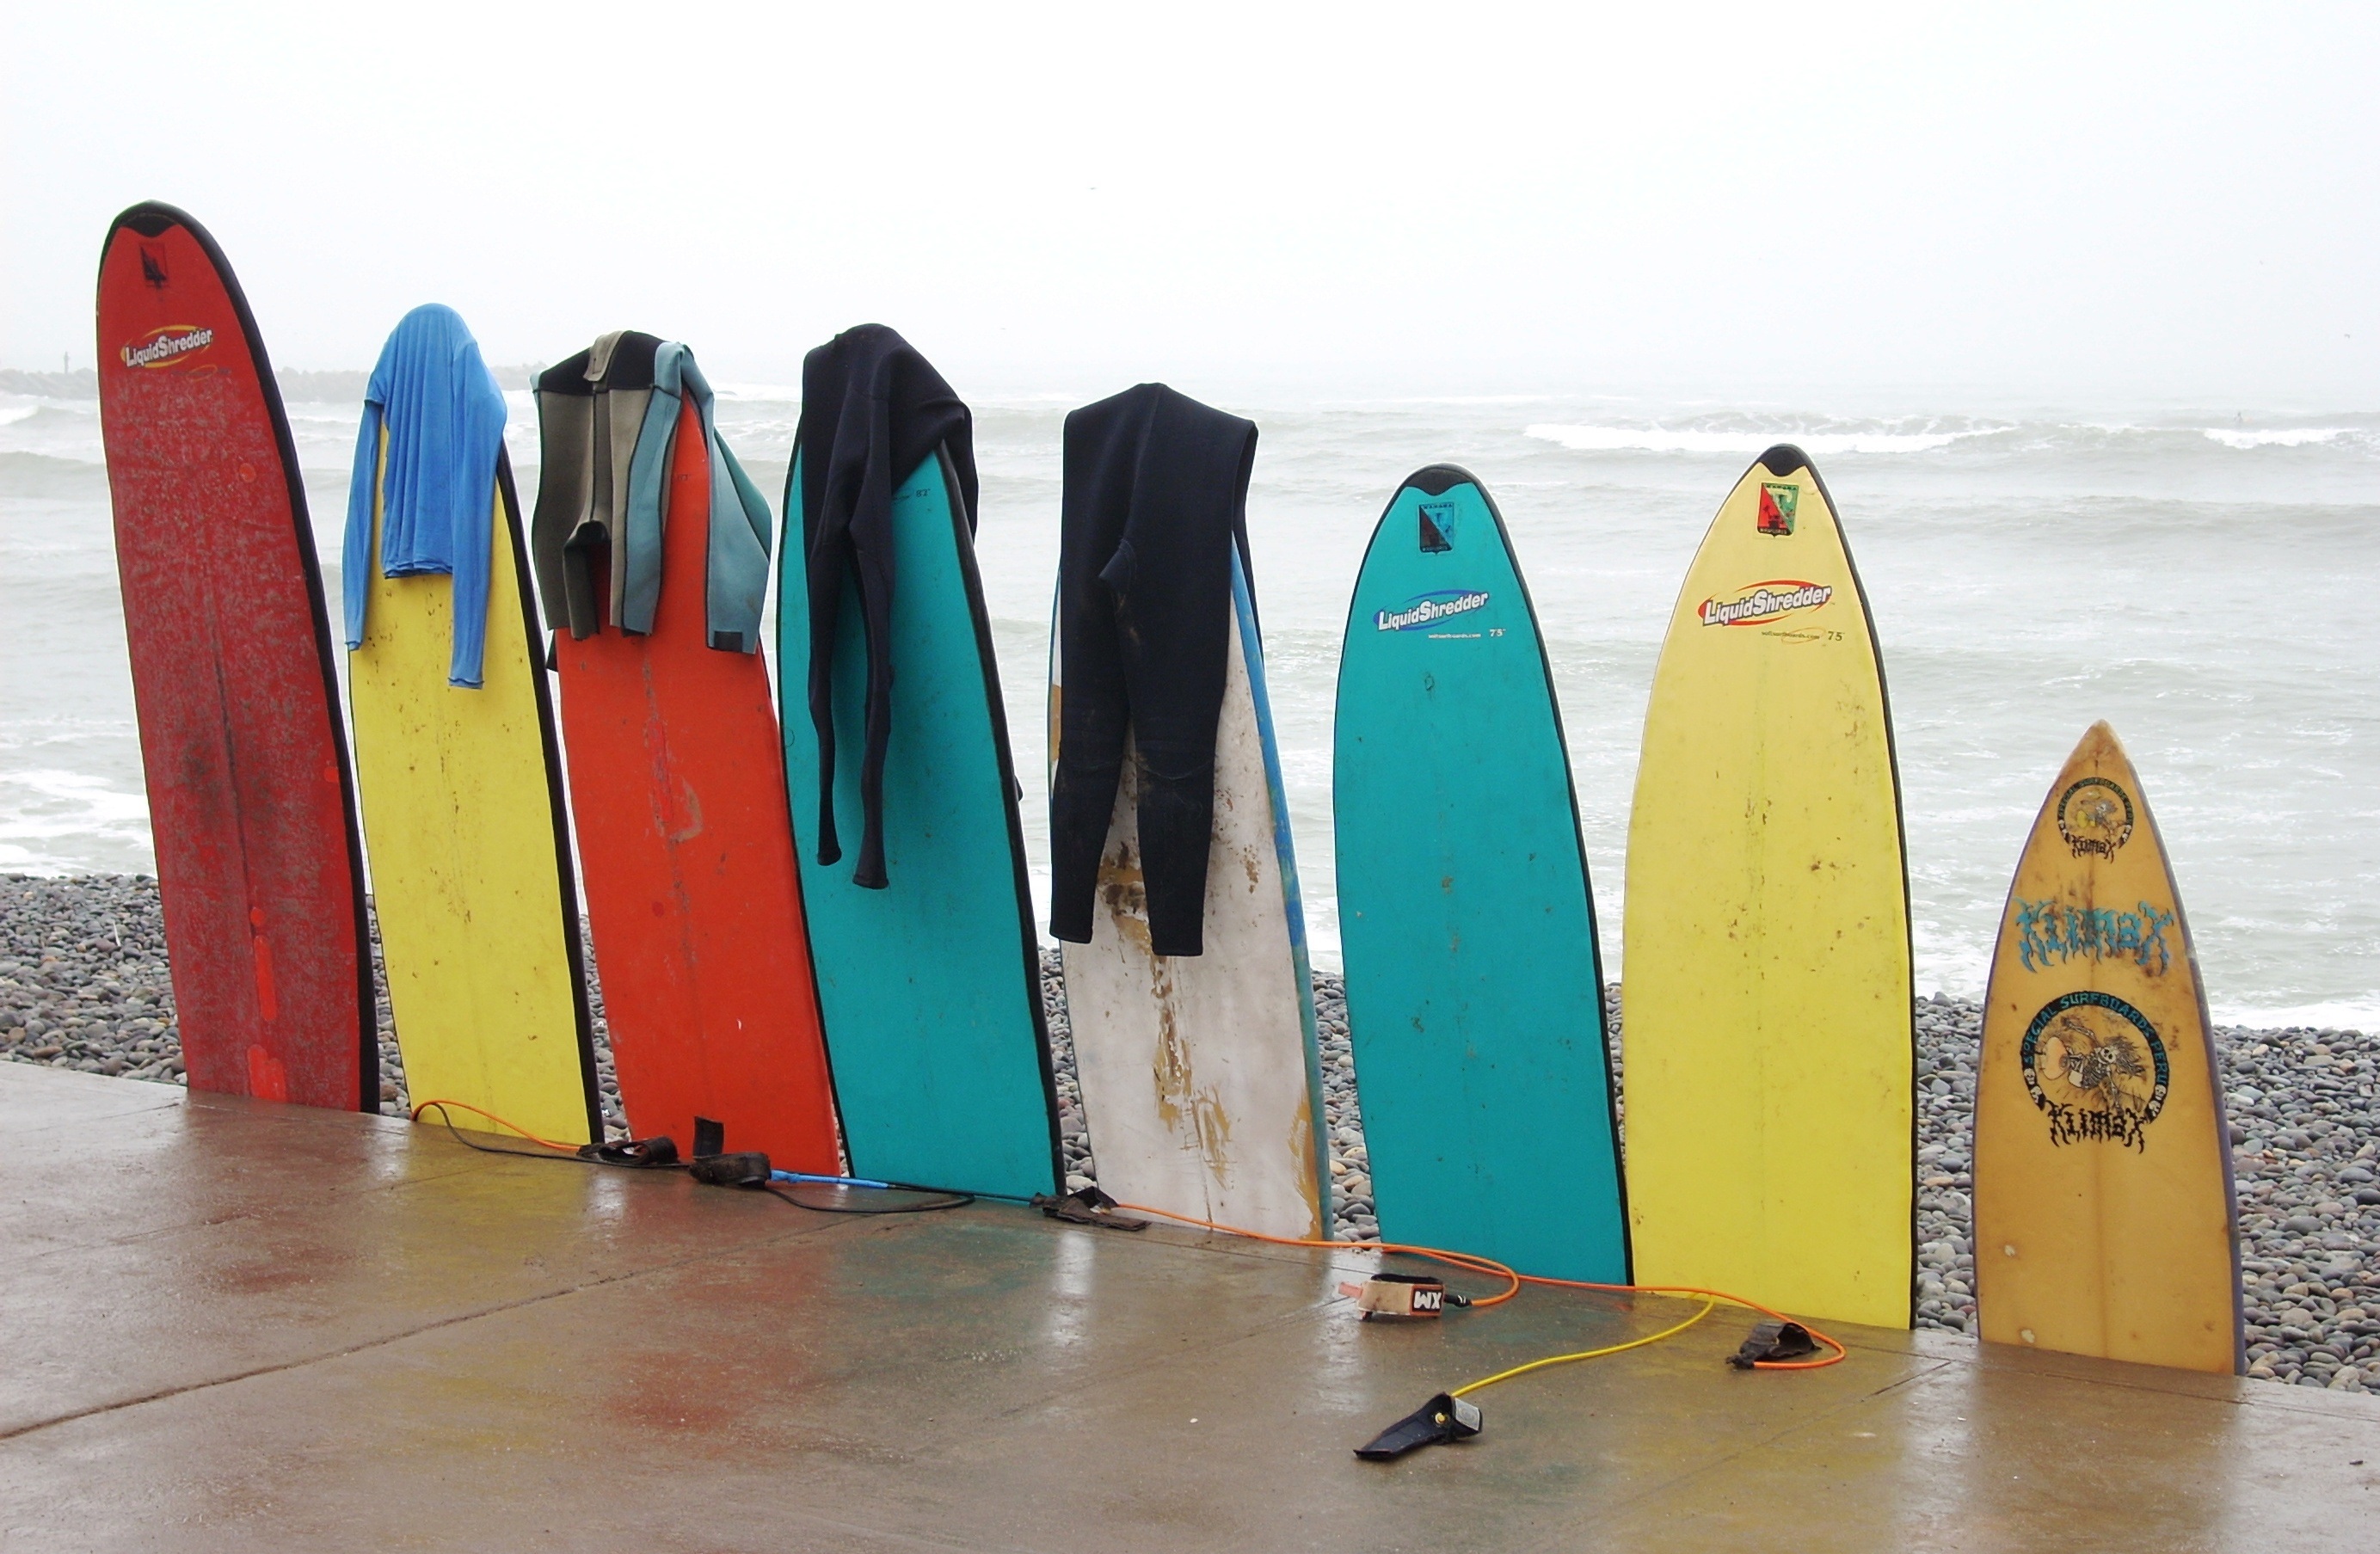 A row of surfboards with wetsuits hanging off them by JPataG